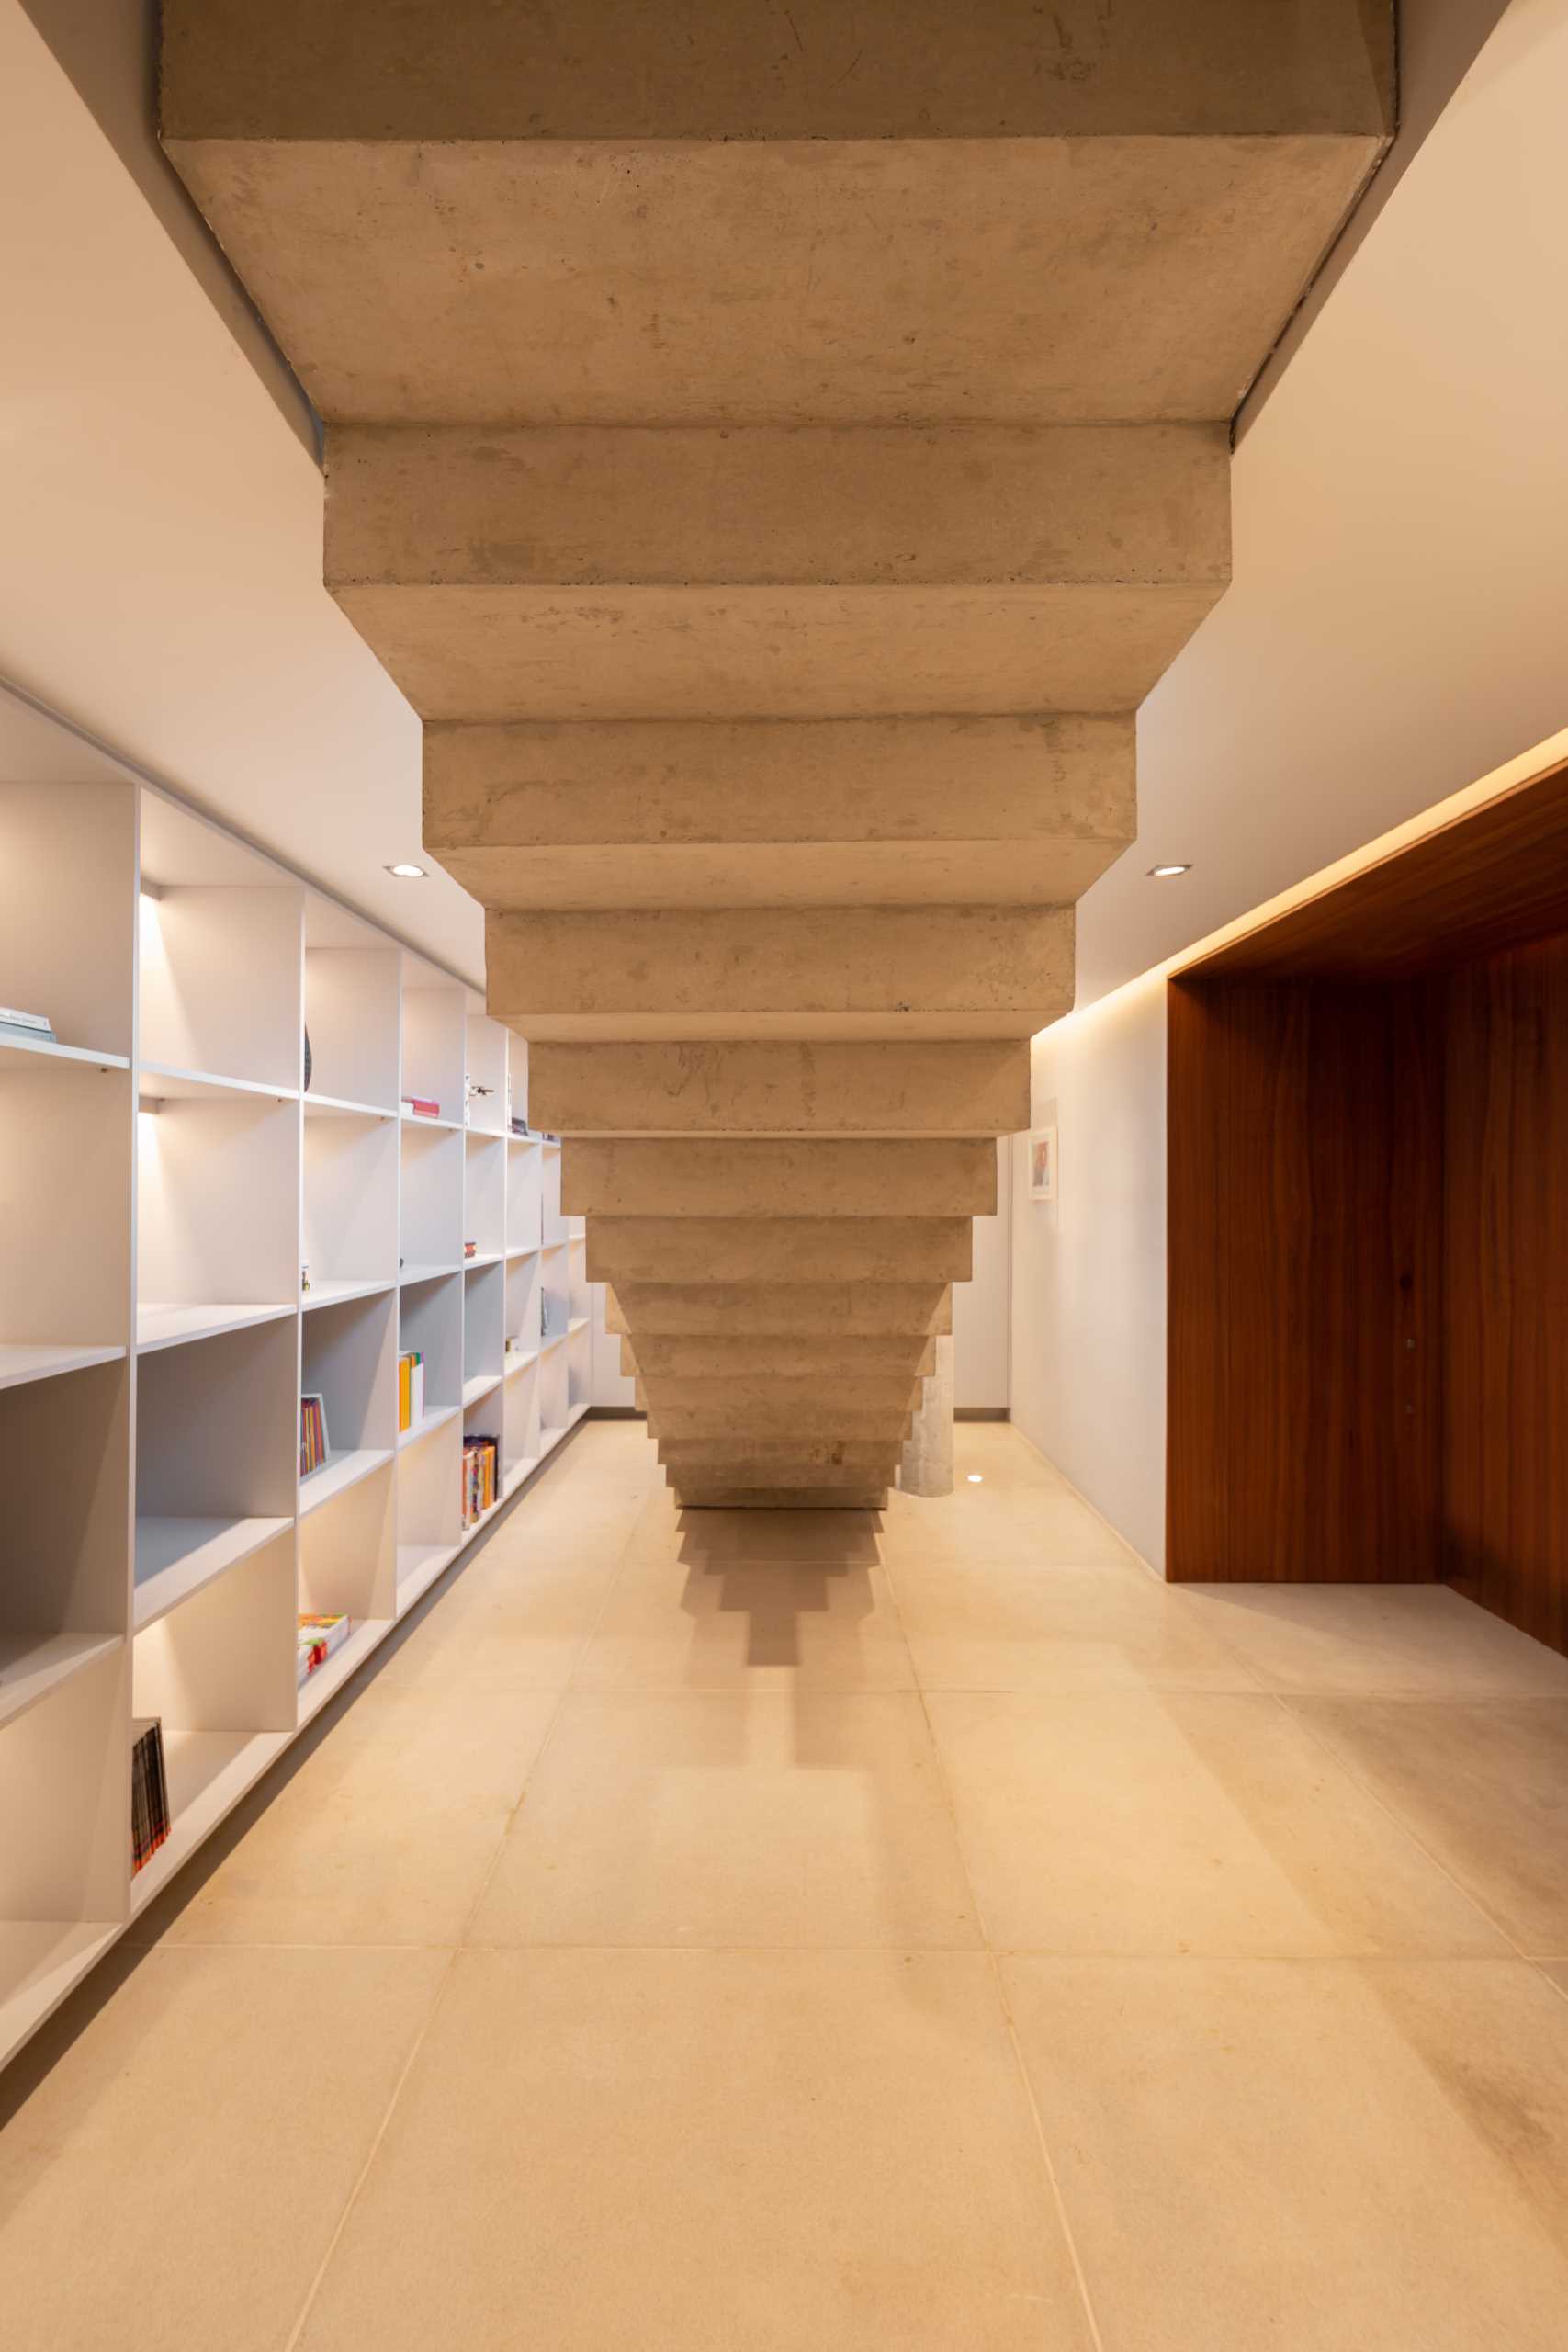 Concrete stairs lead down to a basement that has a wall of shelving with hidden lighting.